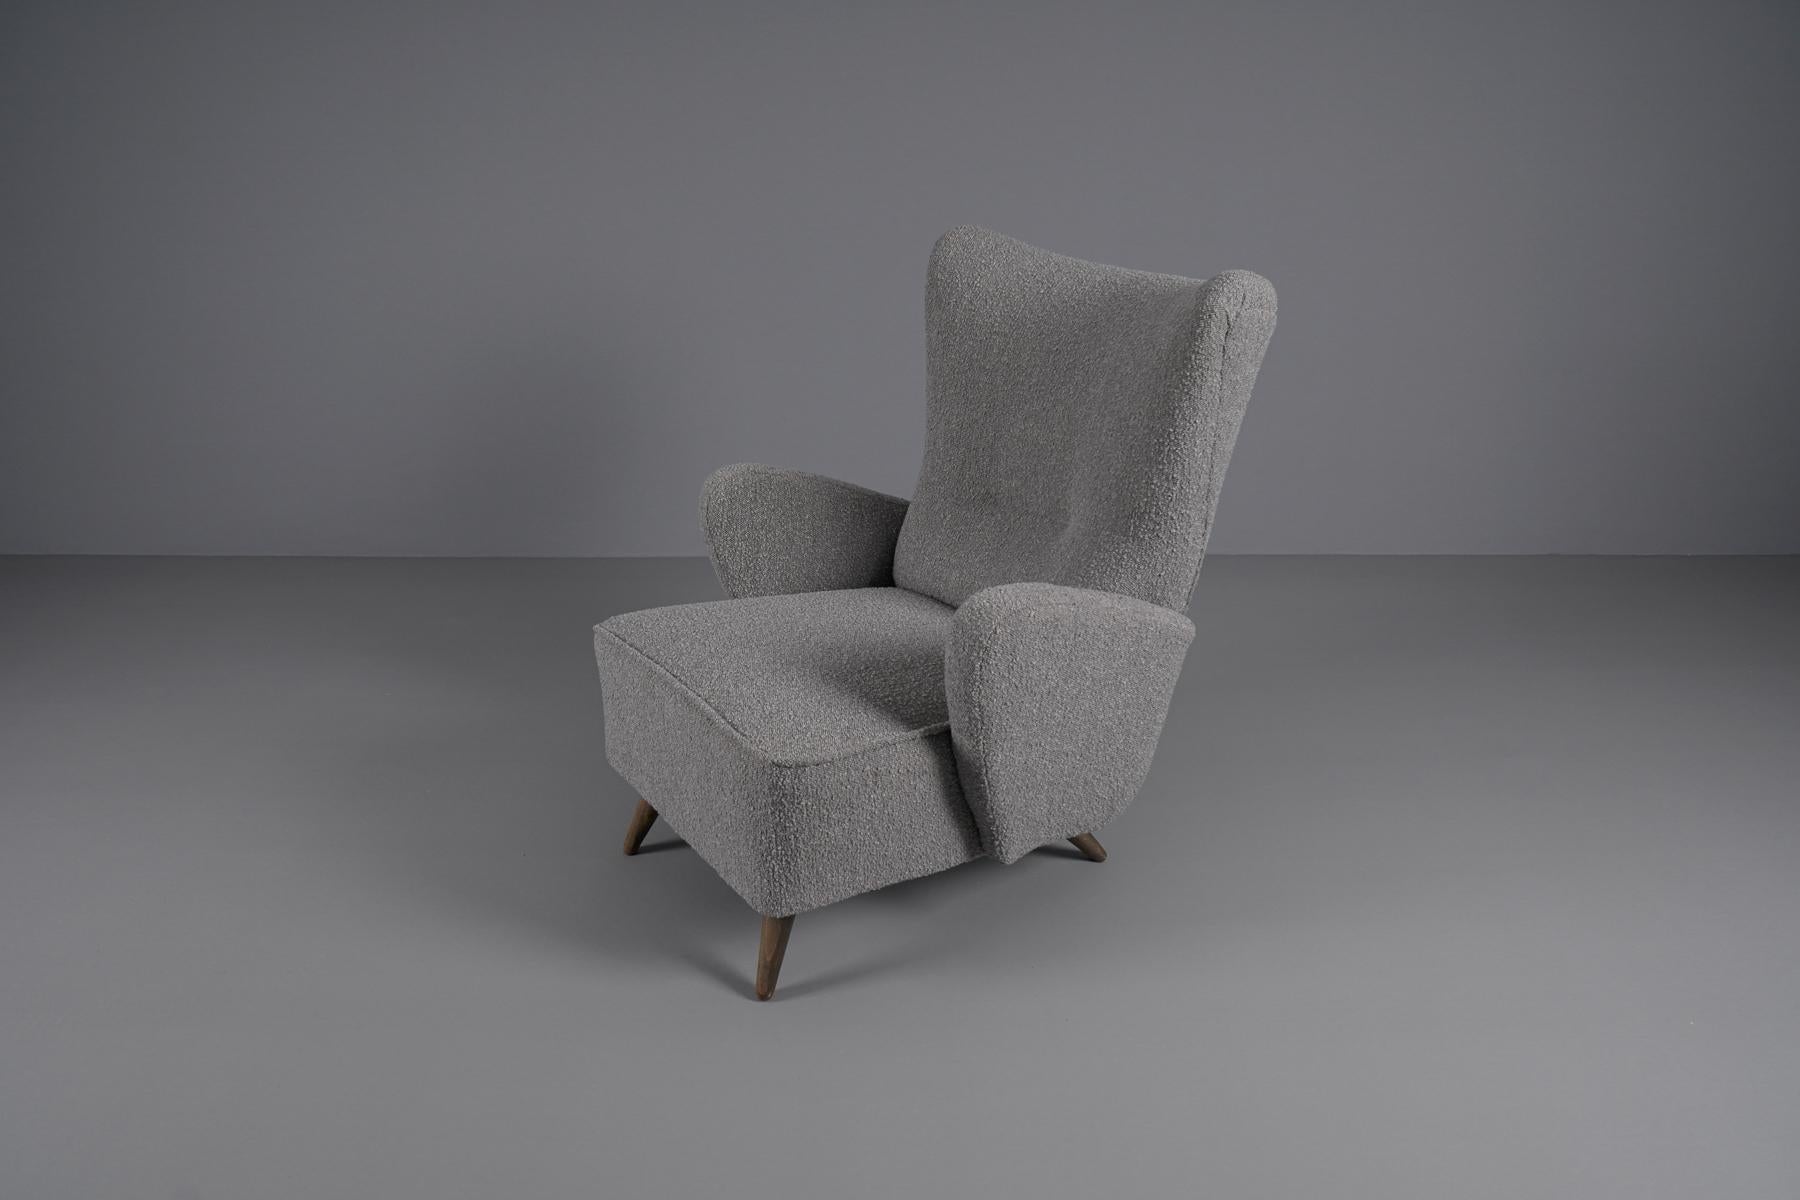 Pair of Large Wingback Armchairs in Grey Boucle Fabric, 1950s For Sale 9